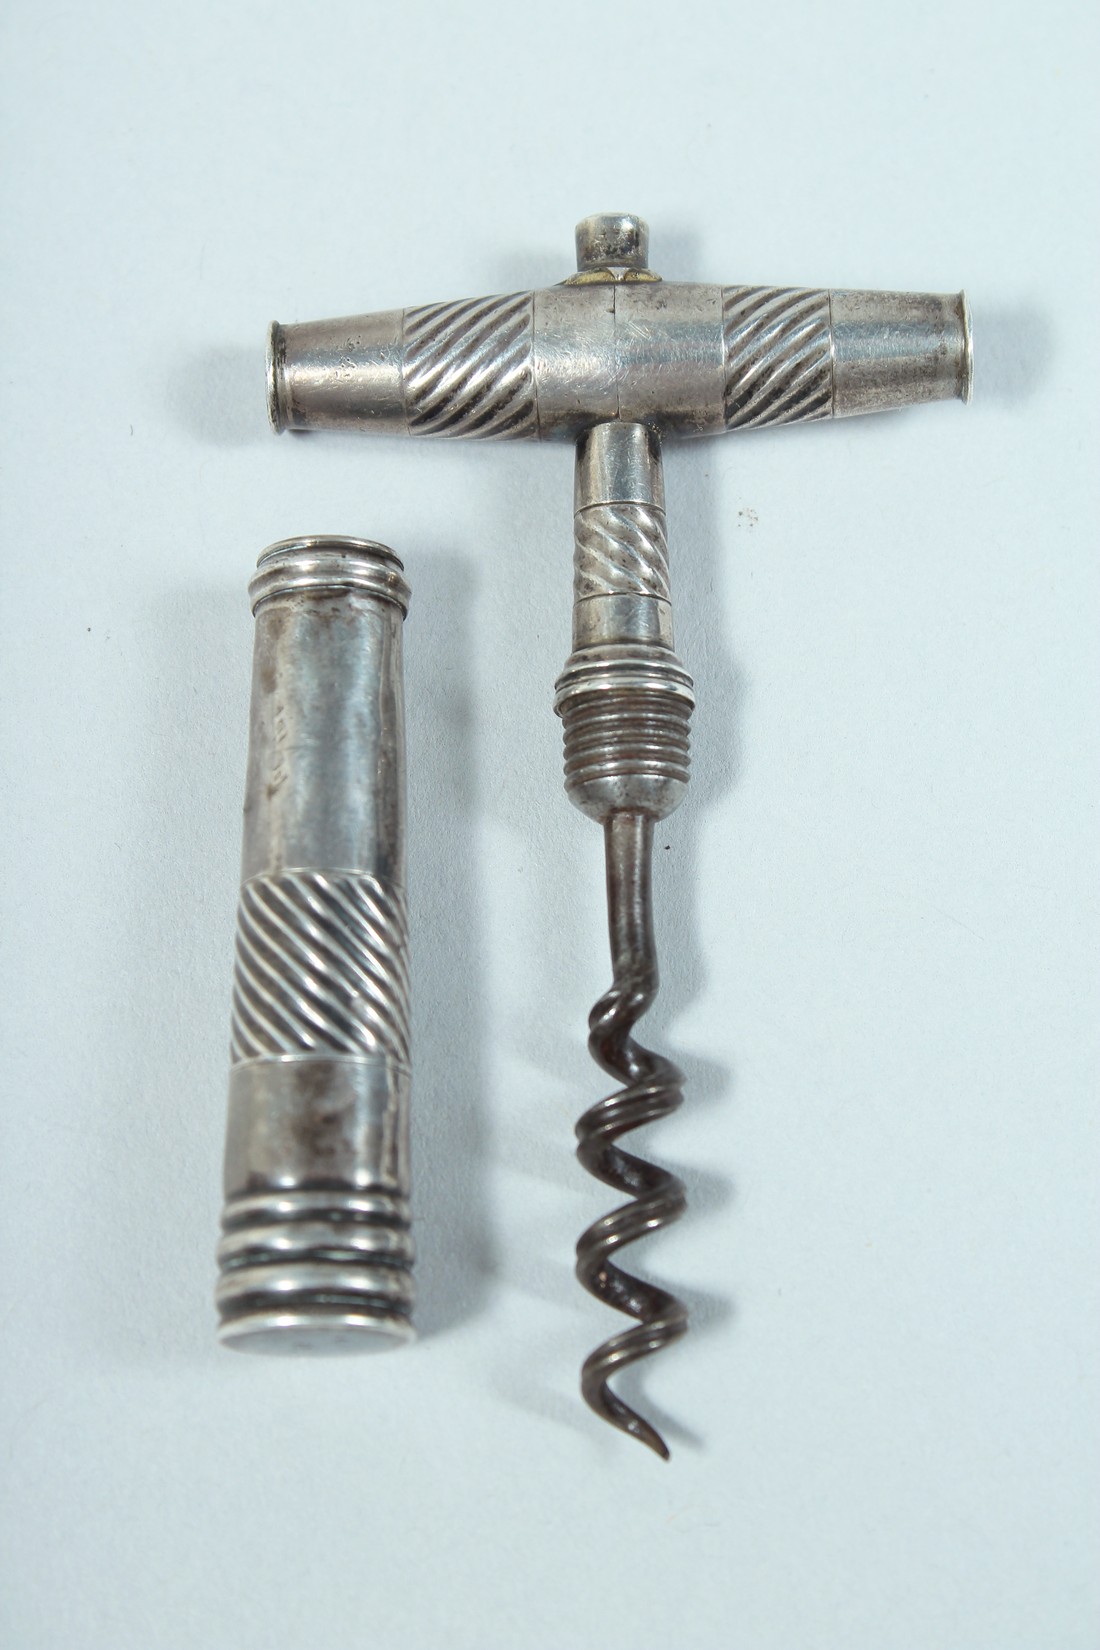 A SMALL SILVER CORKSCREW. 3ins long. - Image 3 of 3